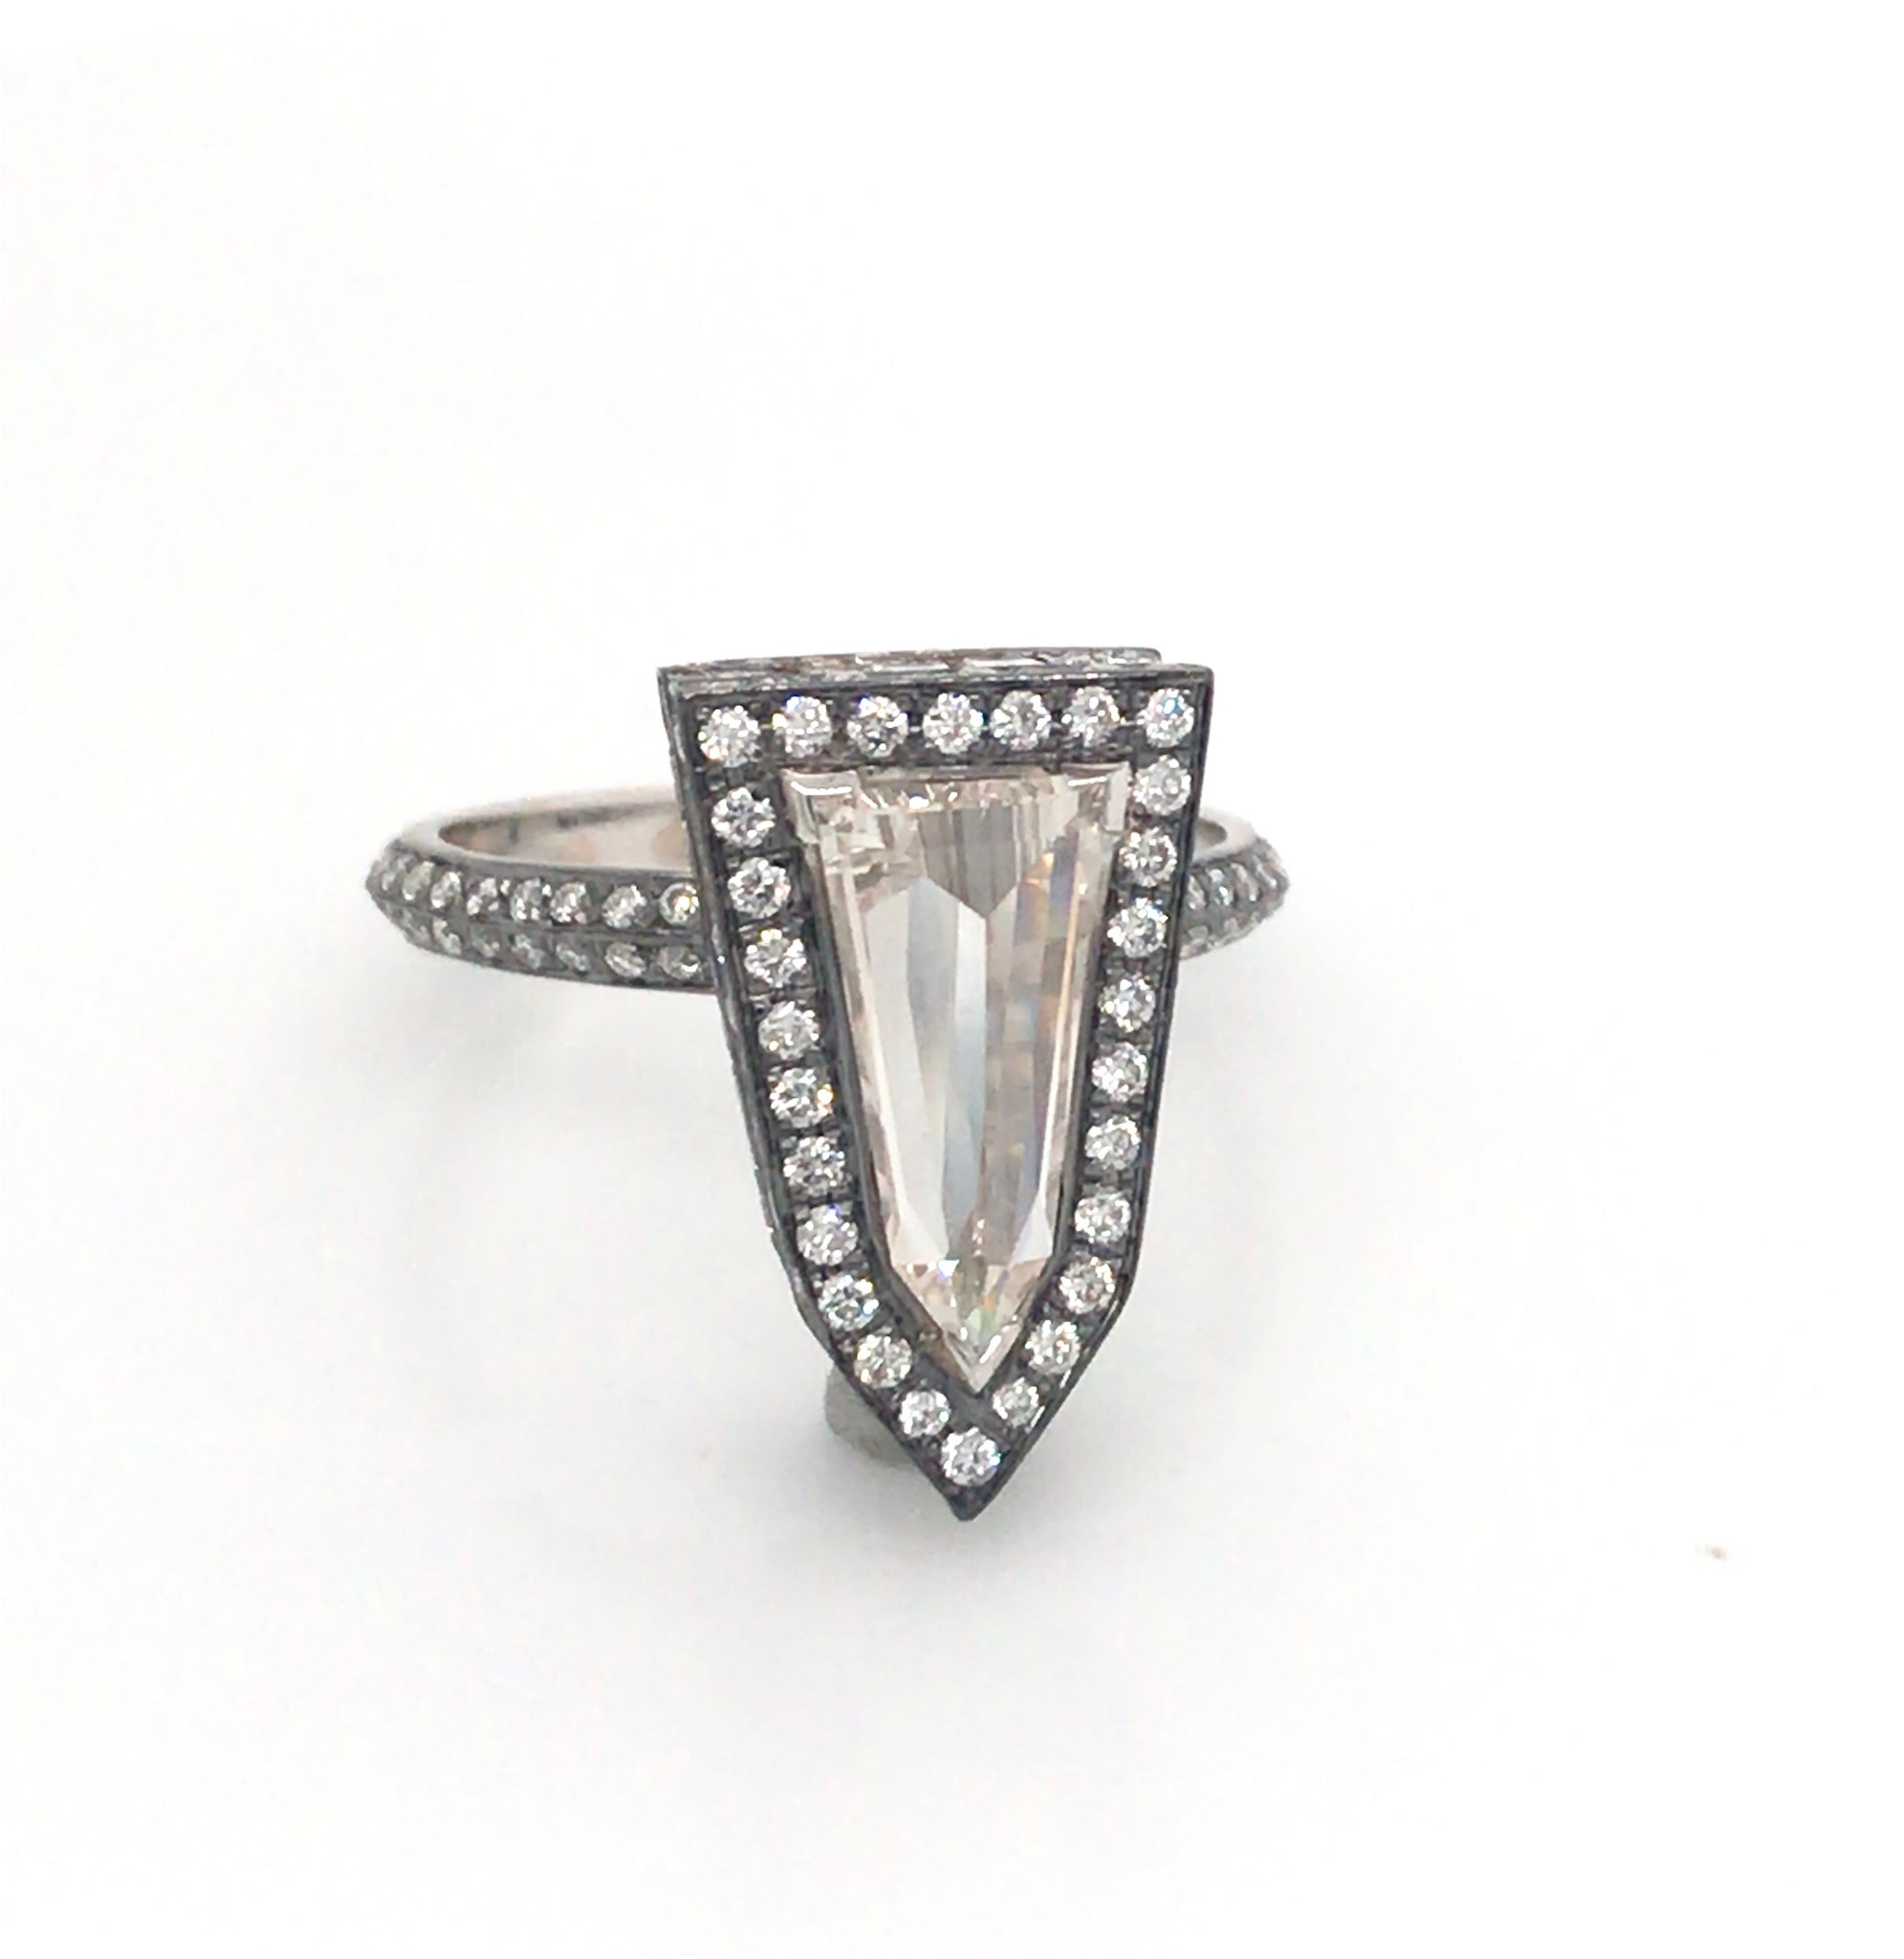 One-of-a-kind Rose-cut Diamond Cocktail Ring 2